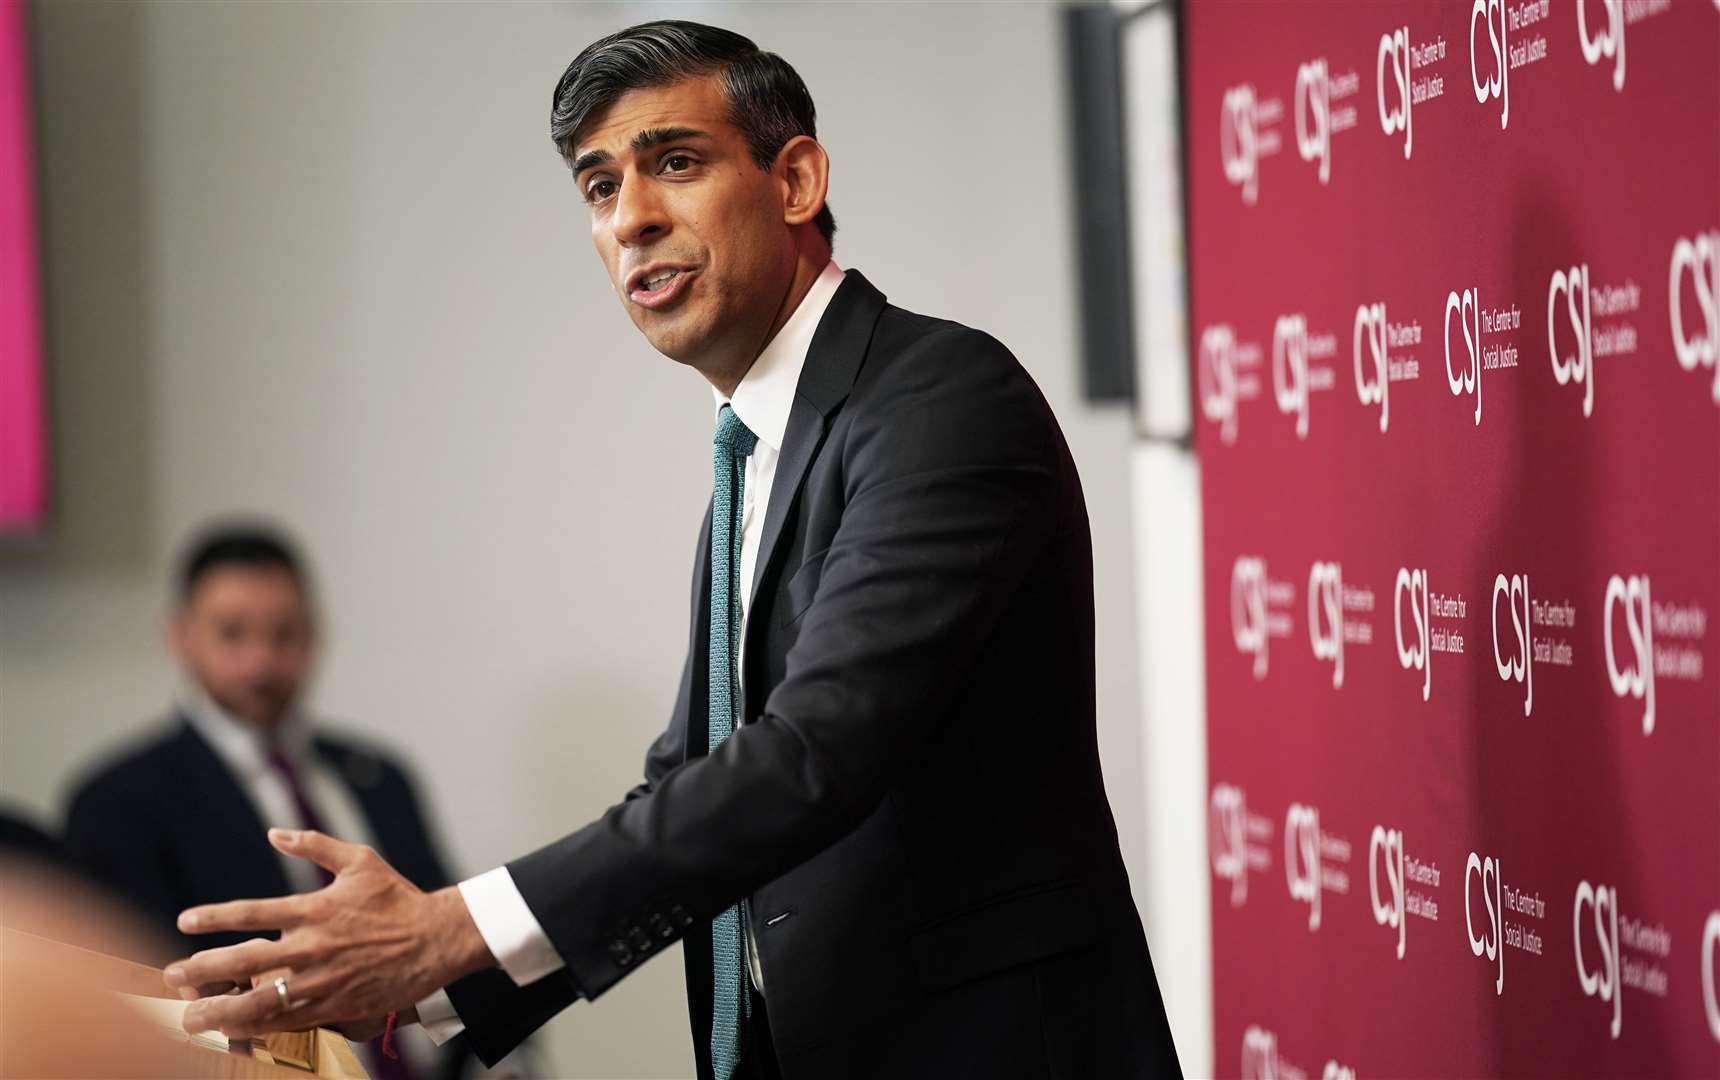 Prime Minister Rishi Sunak spoke about his worries about Pip ‘being misused’ (Yui Mok/PA)